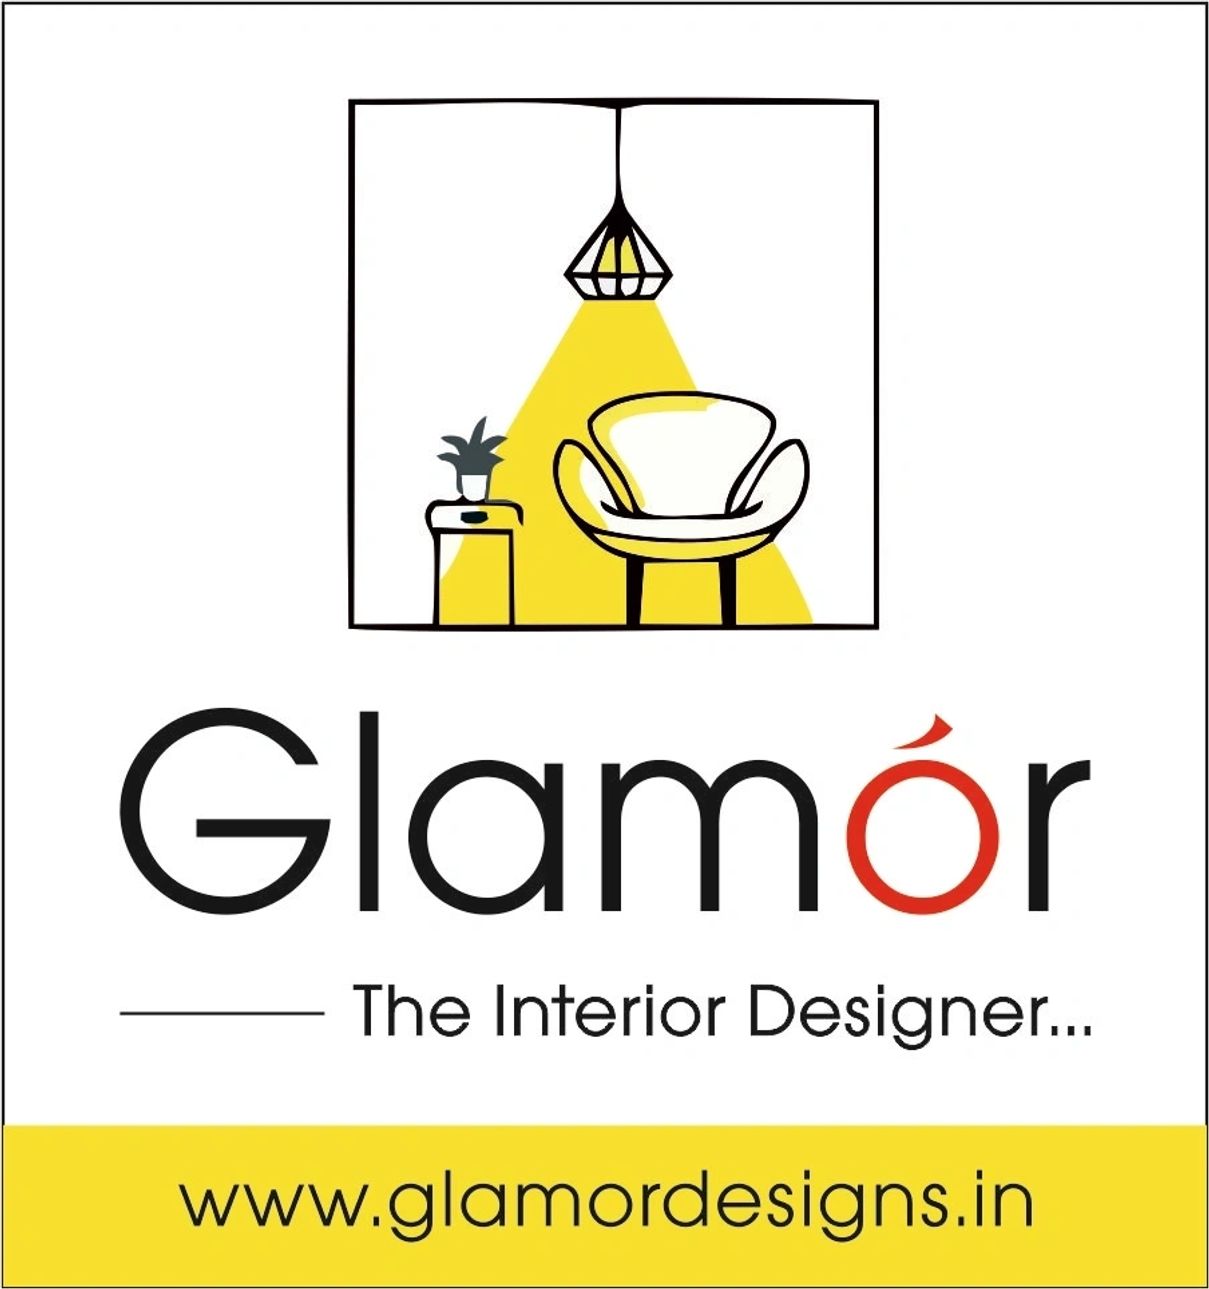 GLAMOR The Interior Designers|IT Services|Professional Services